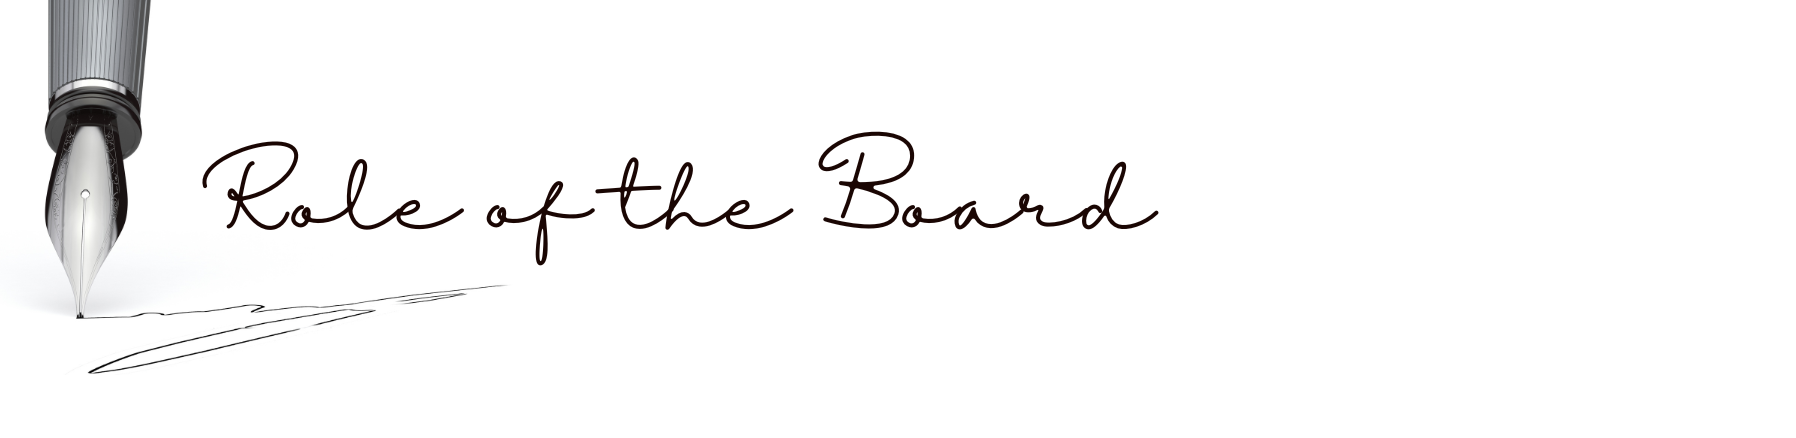 Role of the Board  |  Blog Heading